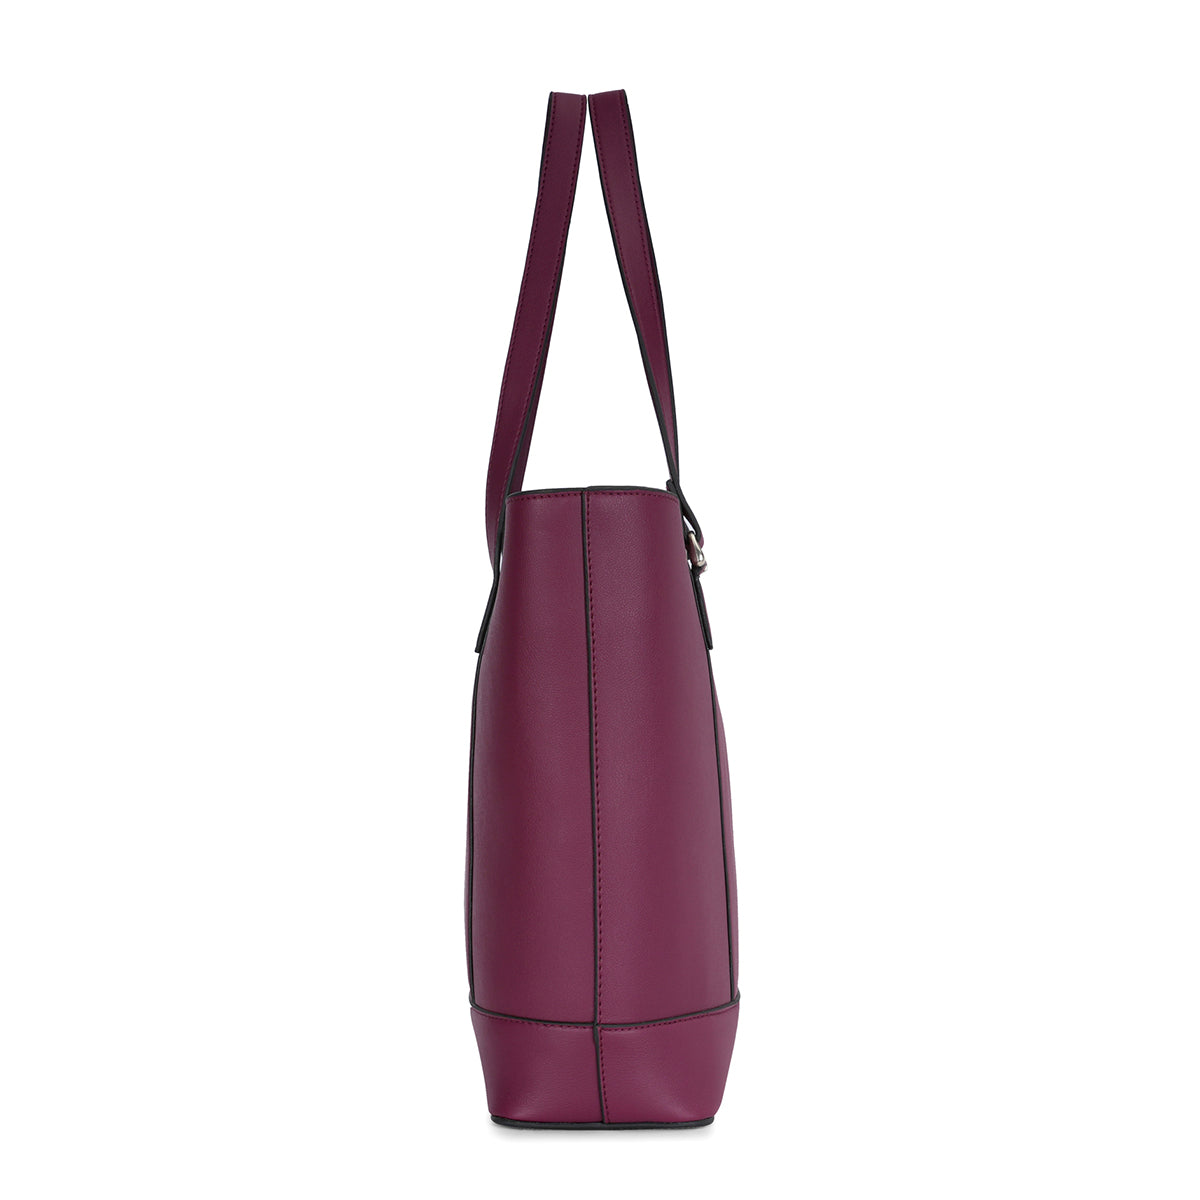 United Colors of Benetton Delphine Woman's PU Tote Burgundy